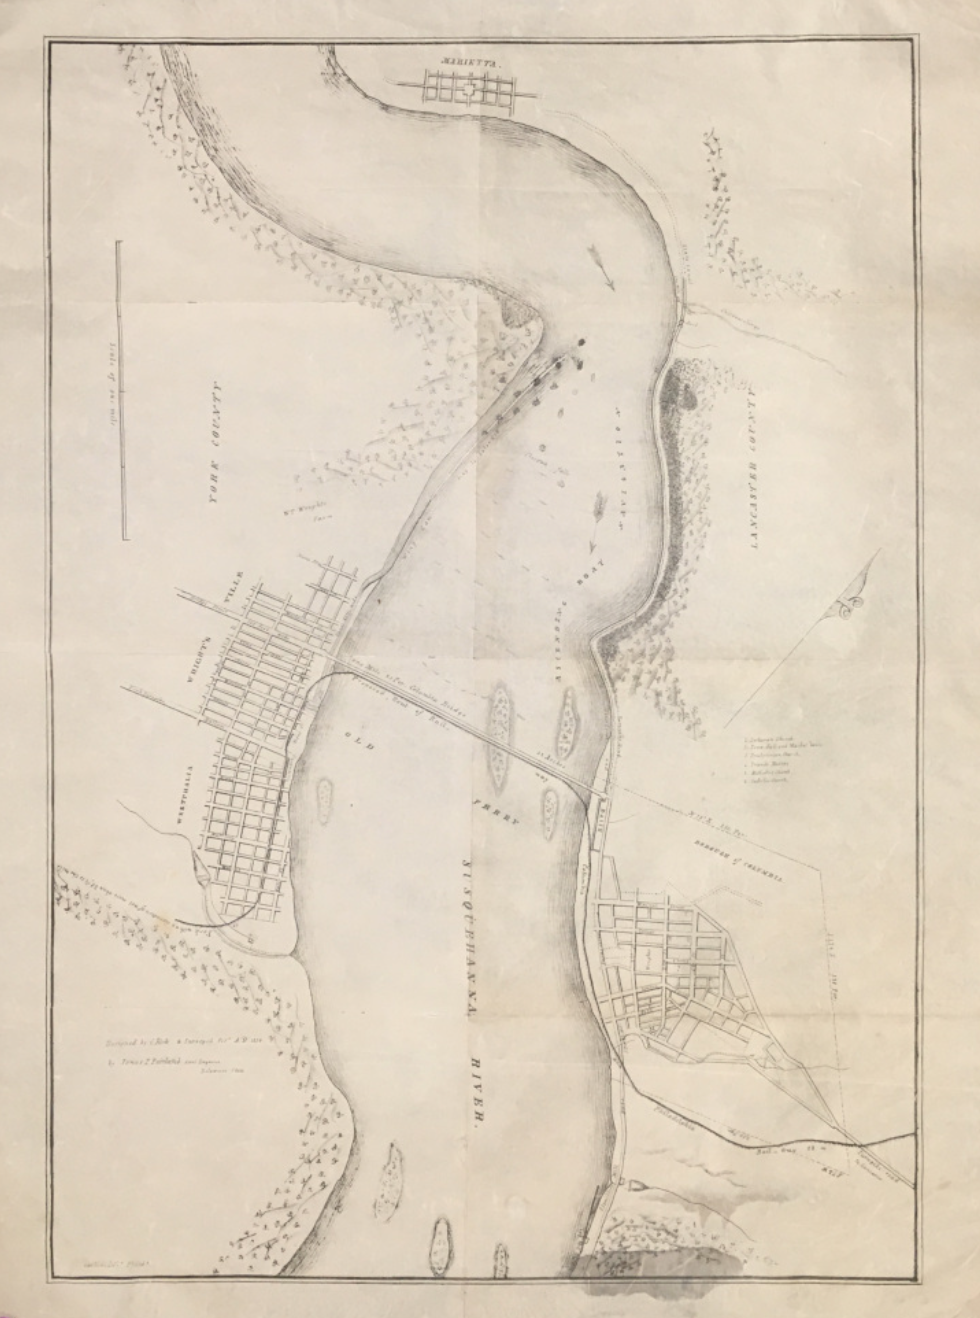 Kirk, Caleb  [Columbia Wrightsville Bridge & River showing Proposed Route of Railway] Columbia, PA. “Surveyed October A.D. 1830,...”